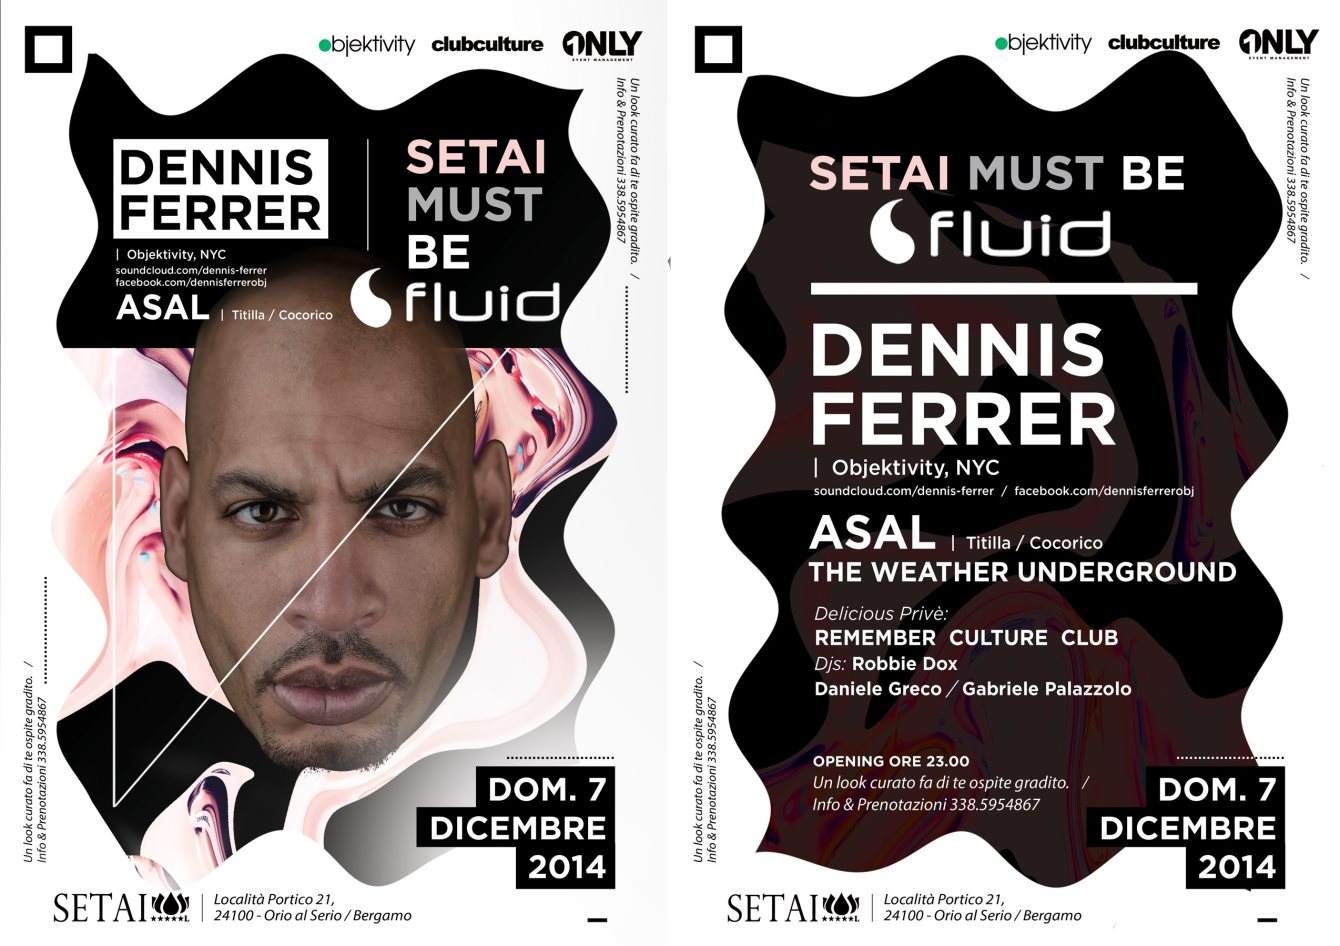 Setai Must be Fluid with Dennis Ferrer - Página frontal